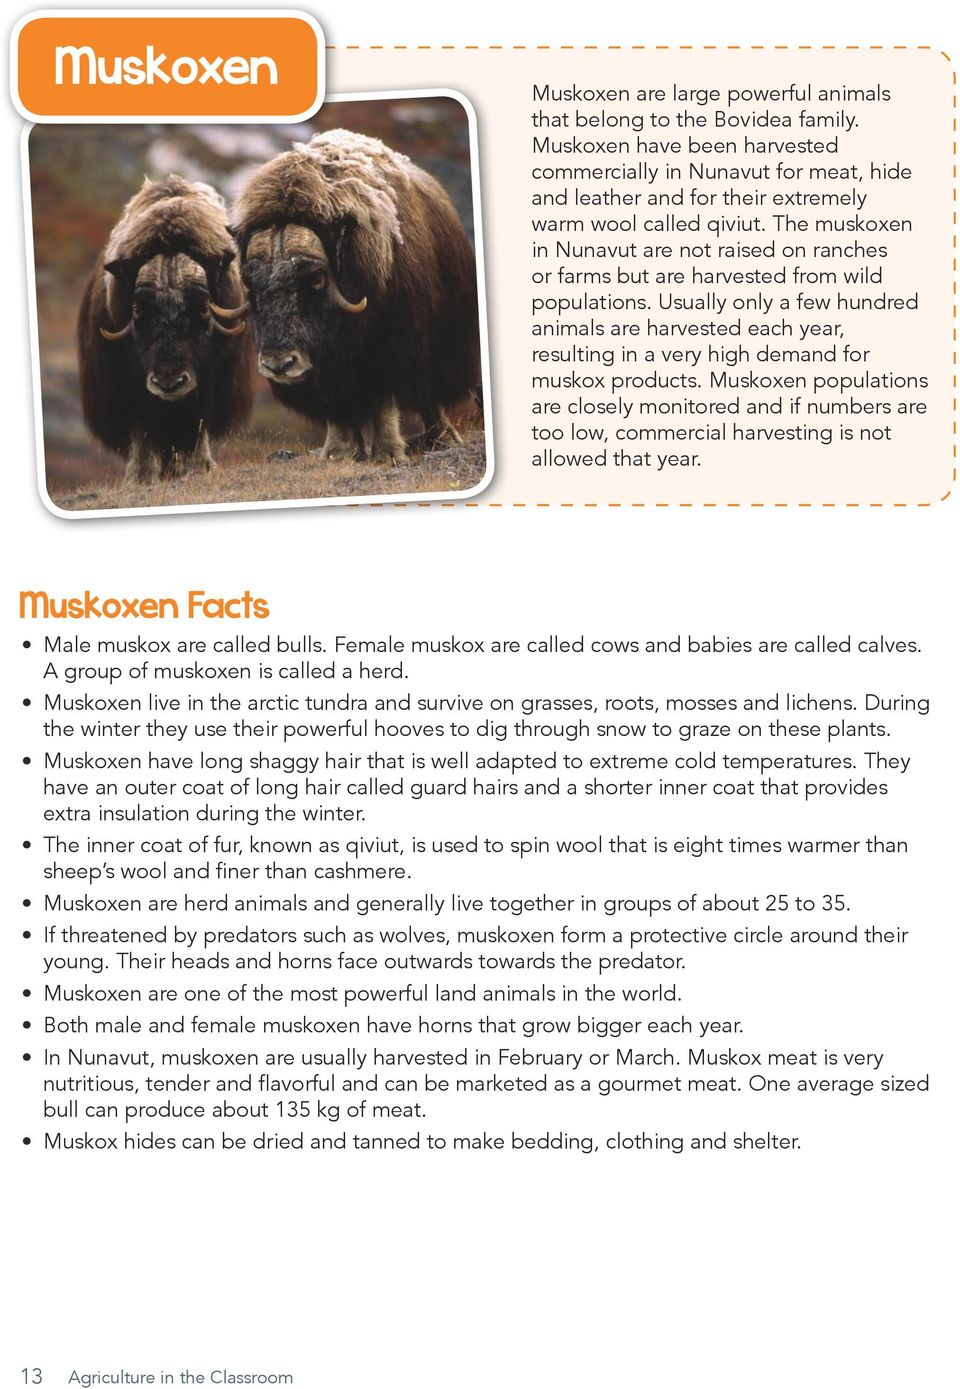 The muskoxen in Nunavut are not raised on ranches or farms but are harvested from wild populations.